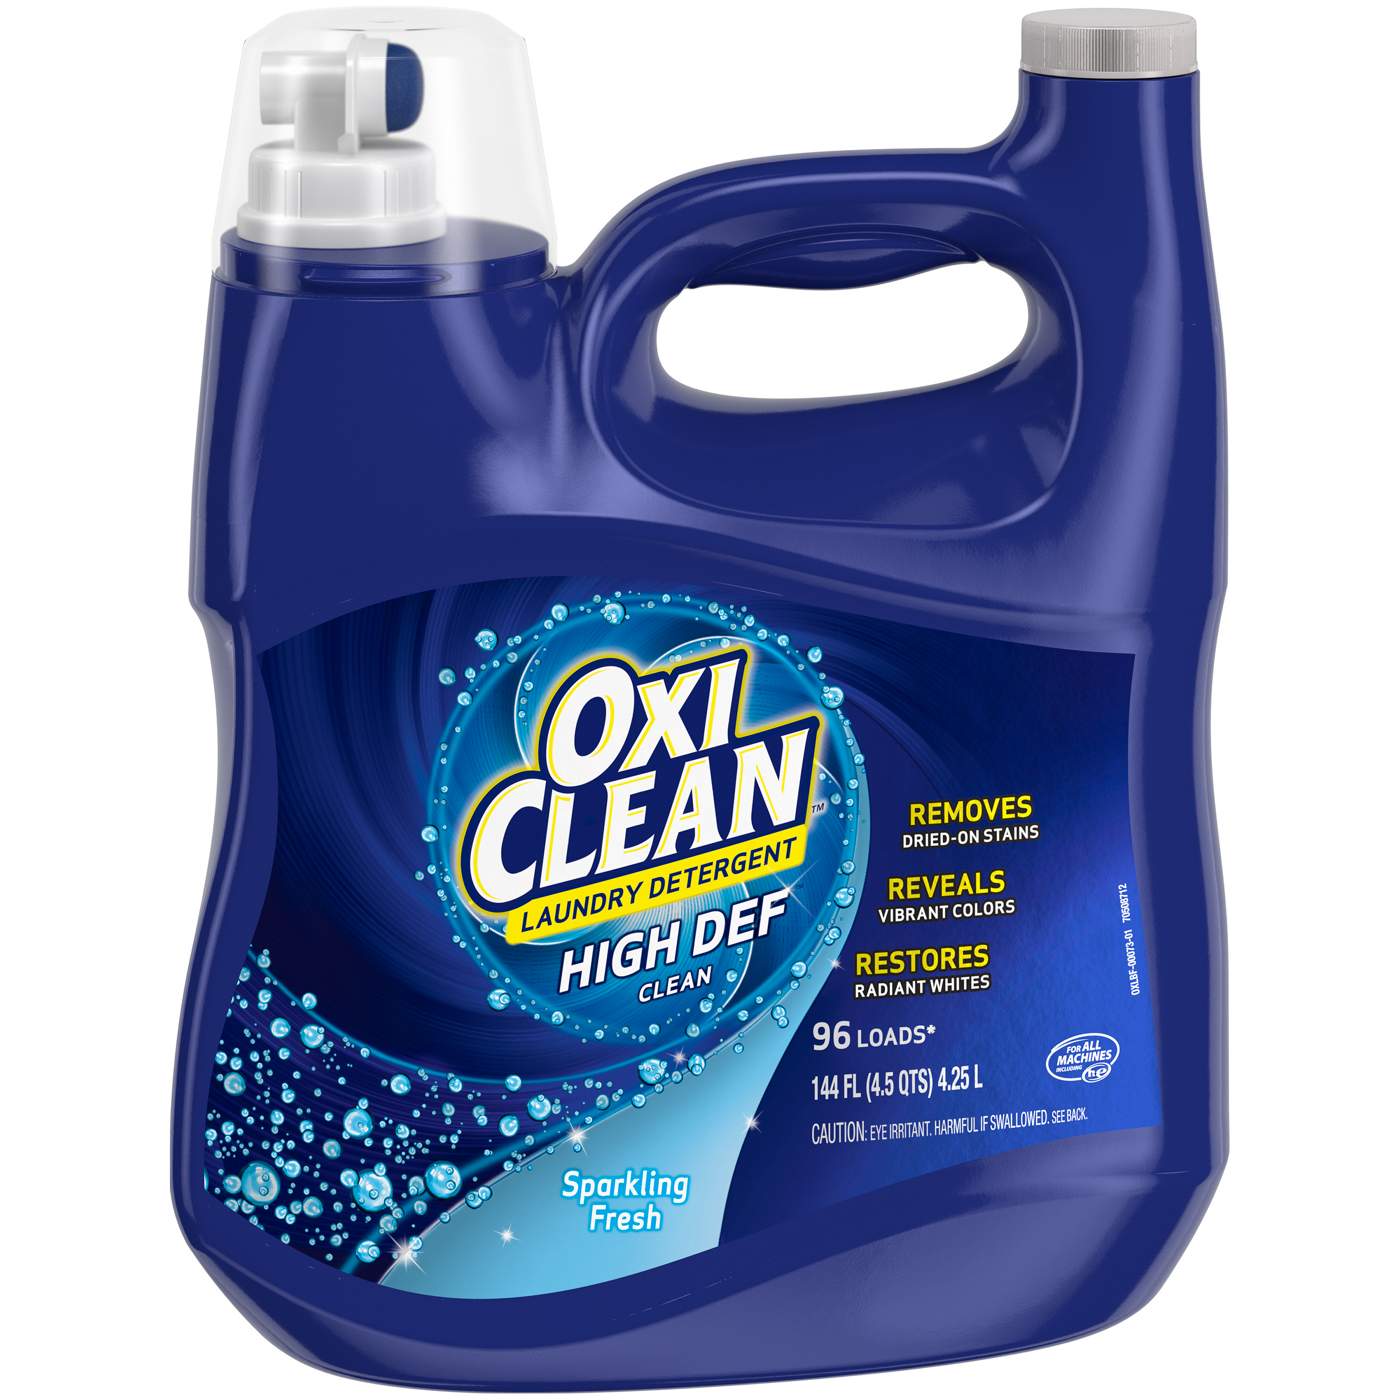 OxiClean Sparkling Fresh HE Liquid Laundry Detergent 96 Loads; image 1 of 2